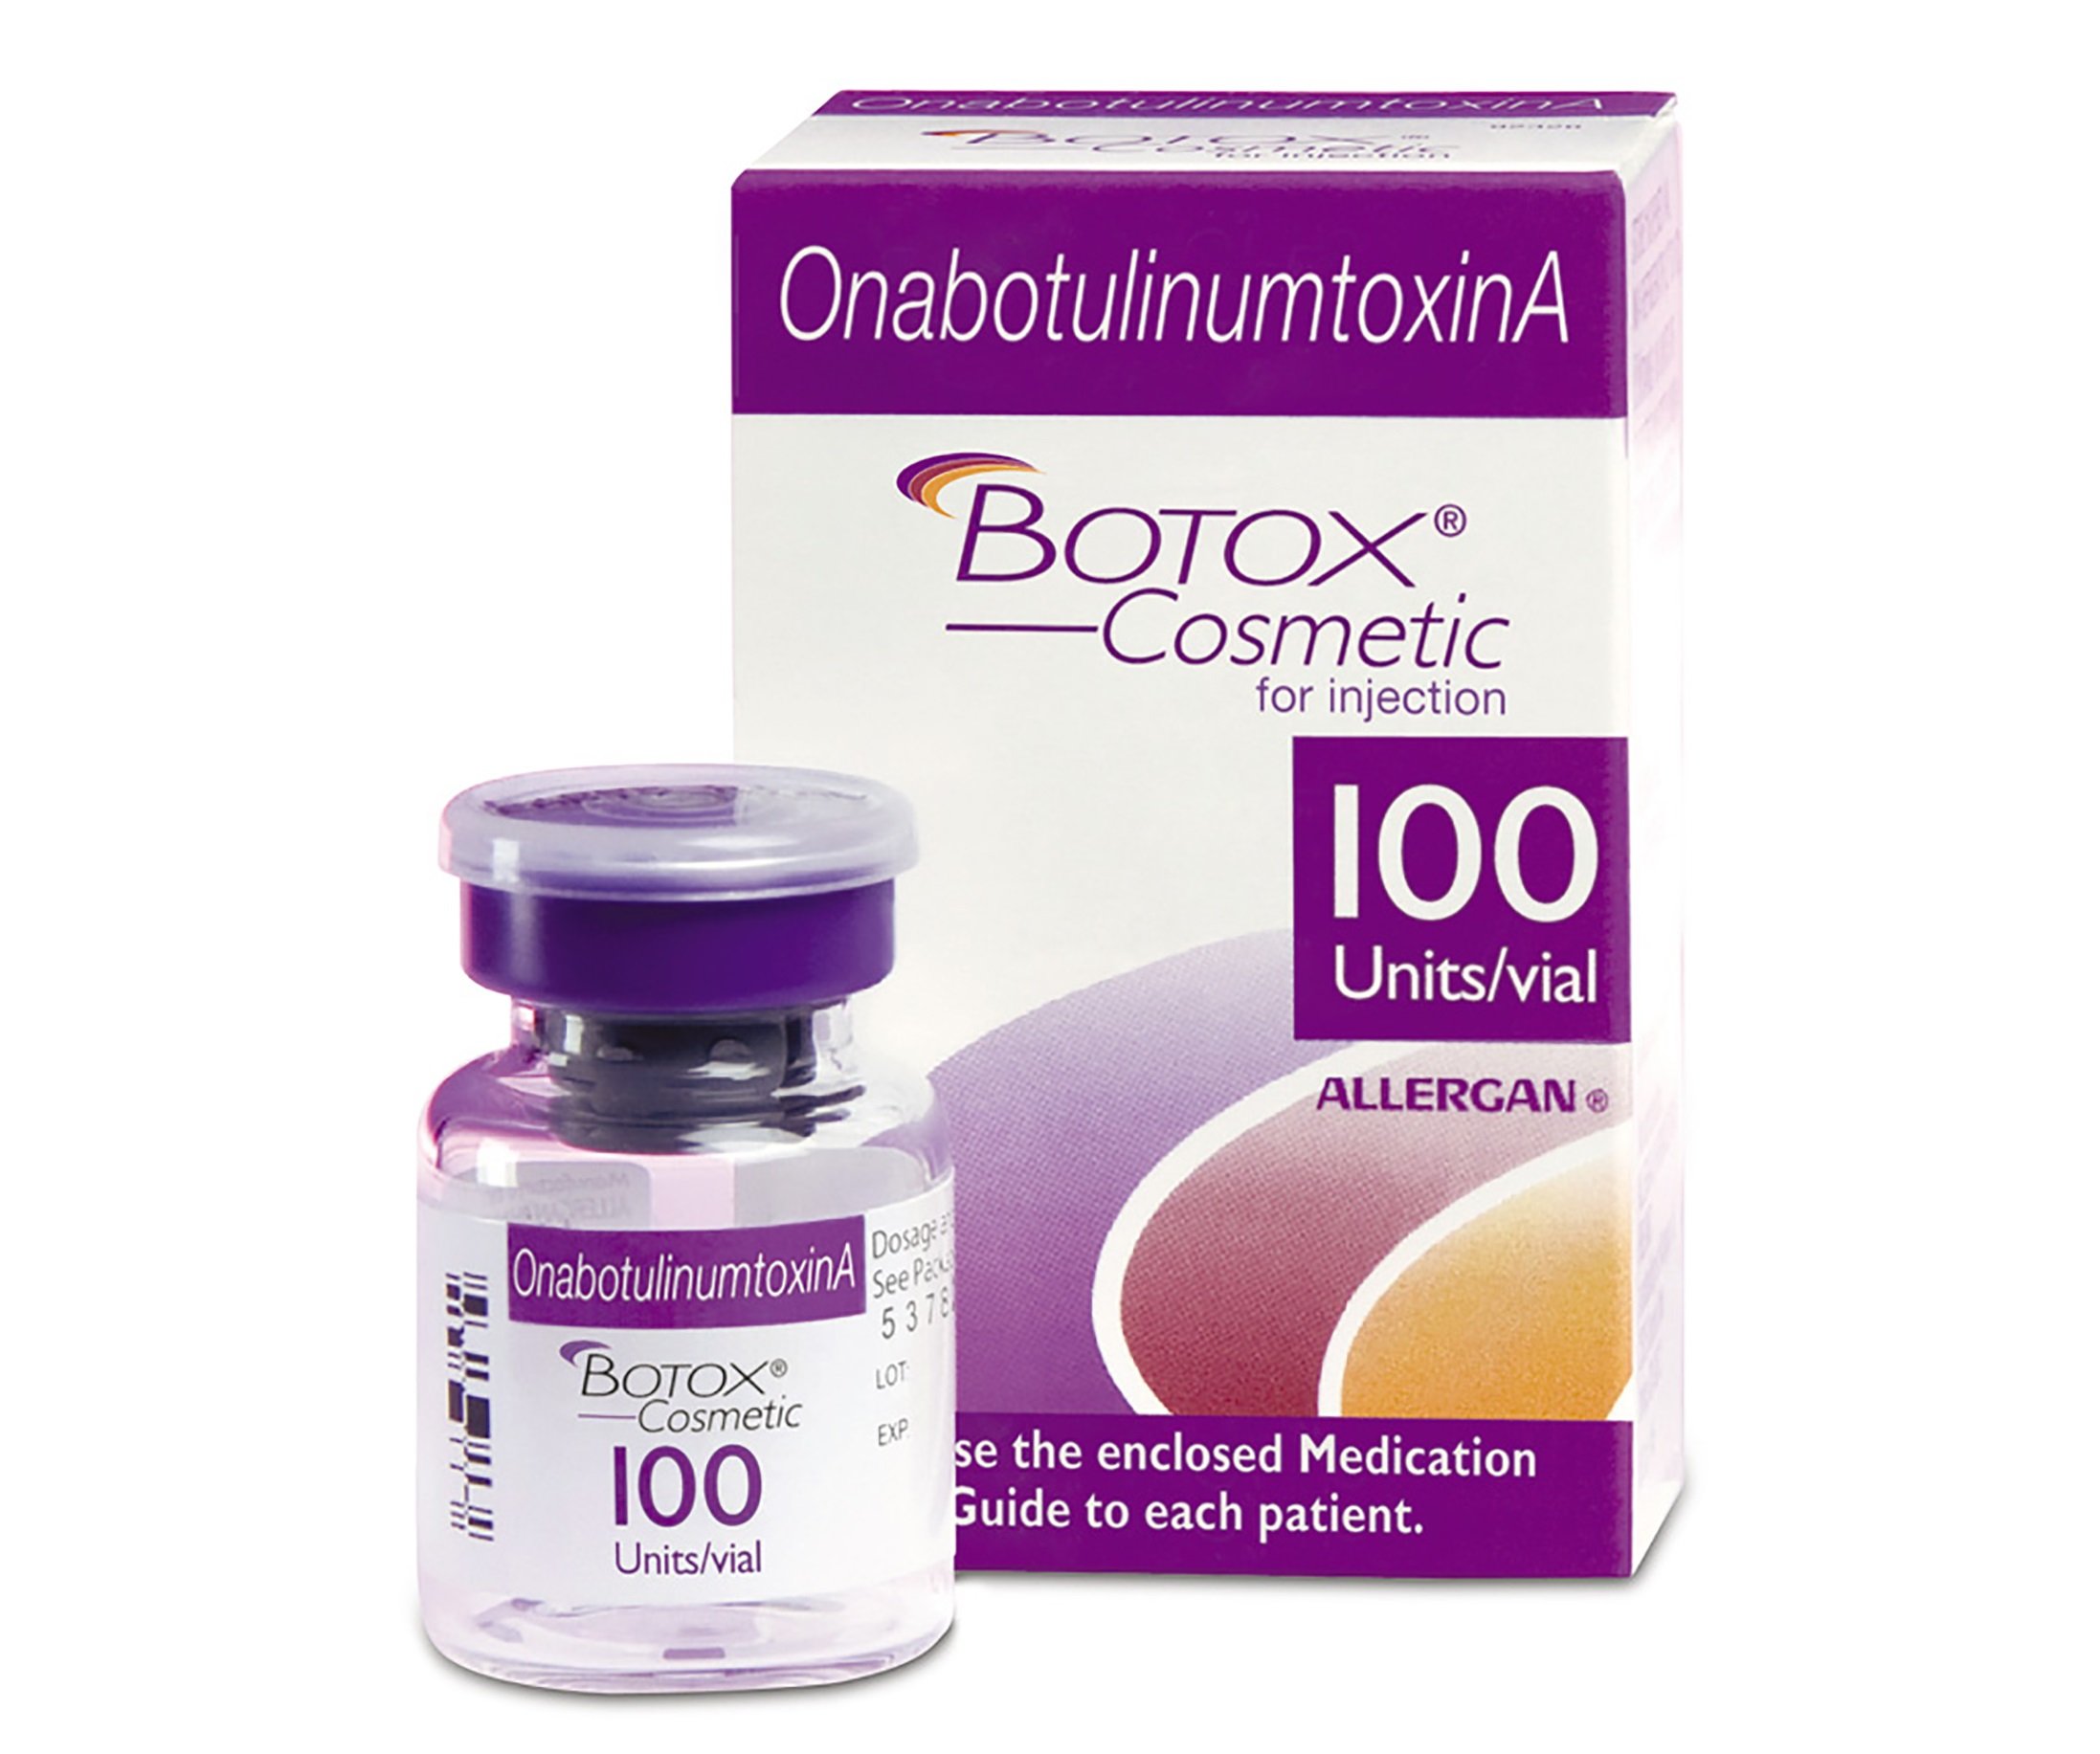 With trial win, AbbVie cues up Botox for another cosmetic indication